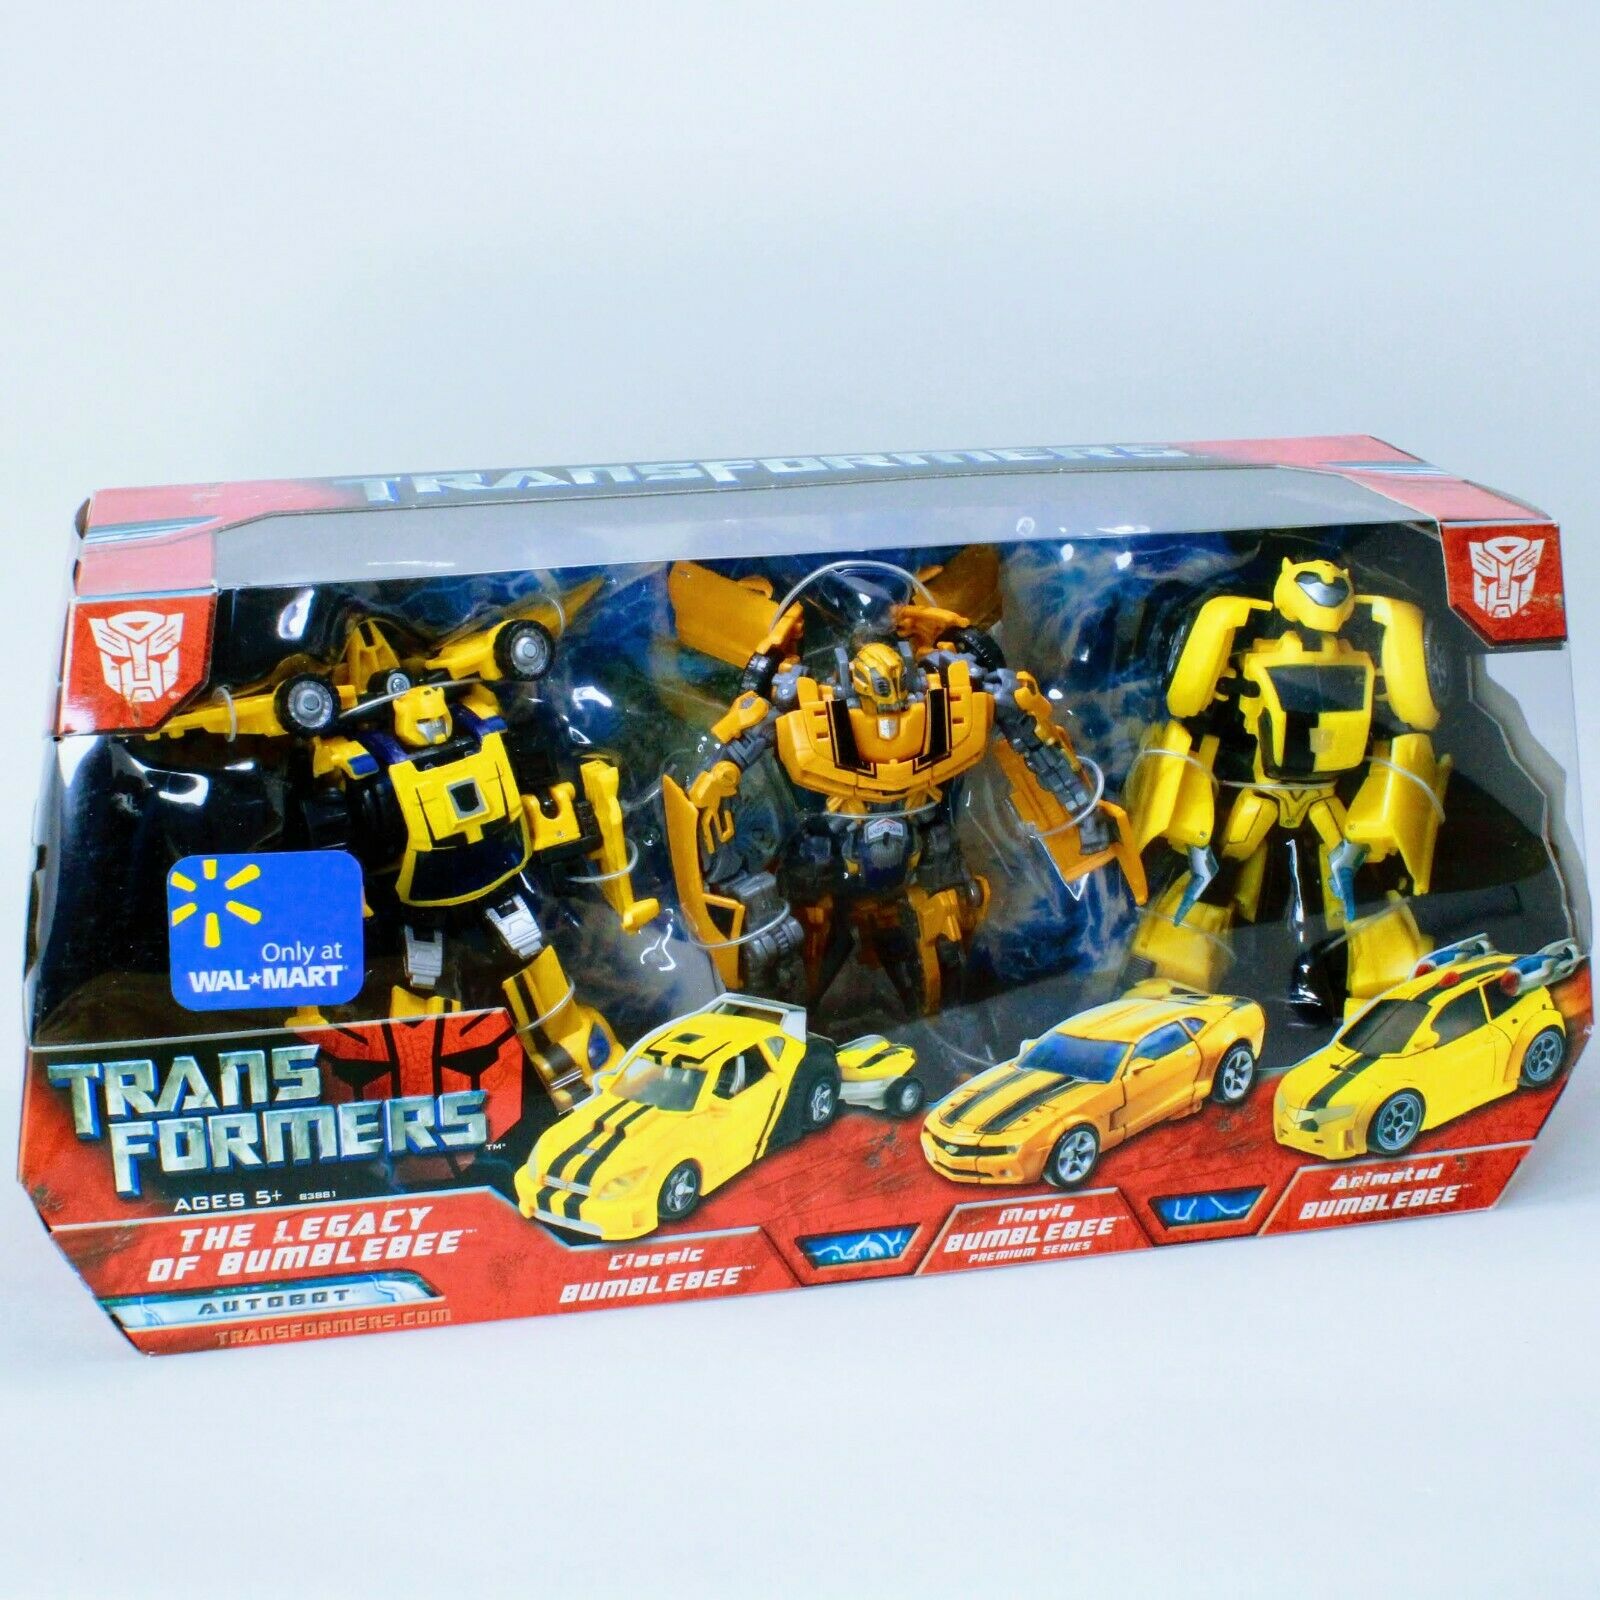 Transformers The Legacy of Bumblebee 3-pack Walmart Excl. Figures 2007 Movie